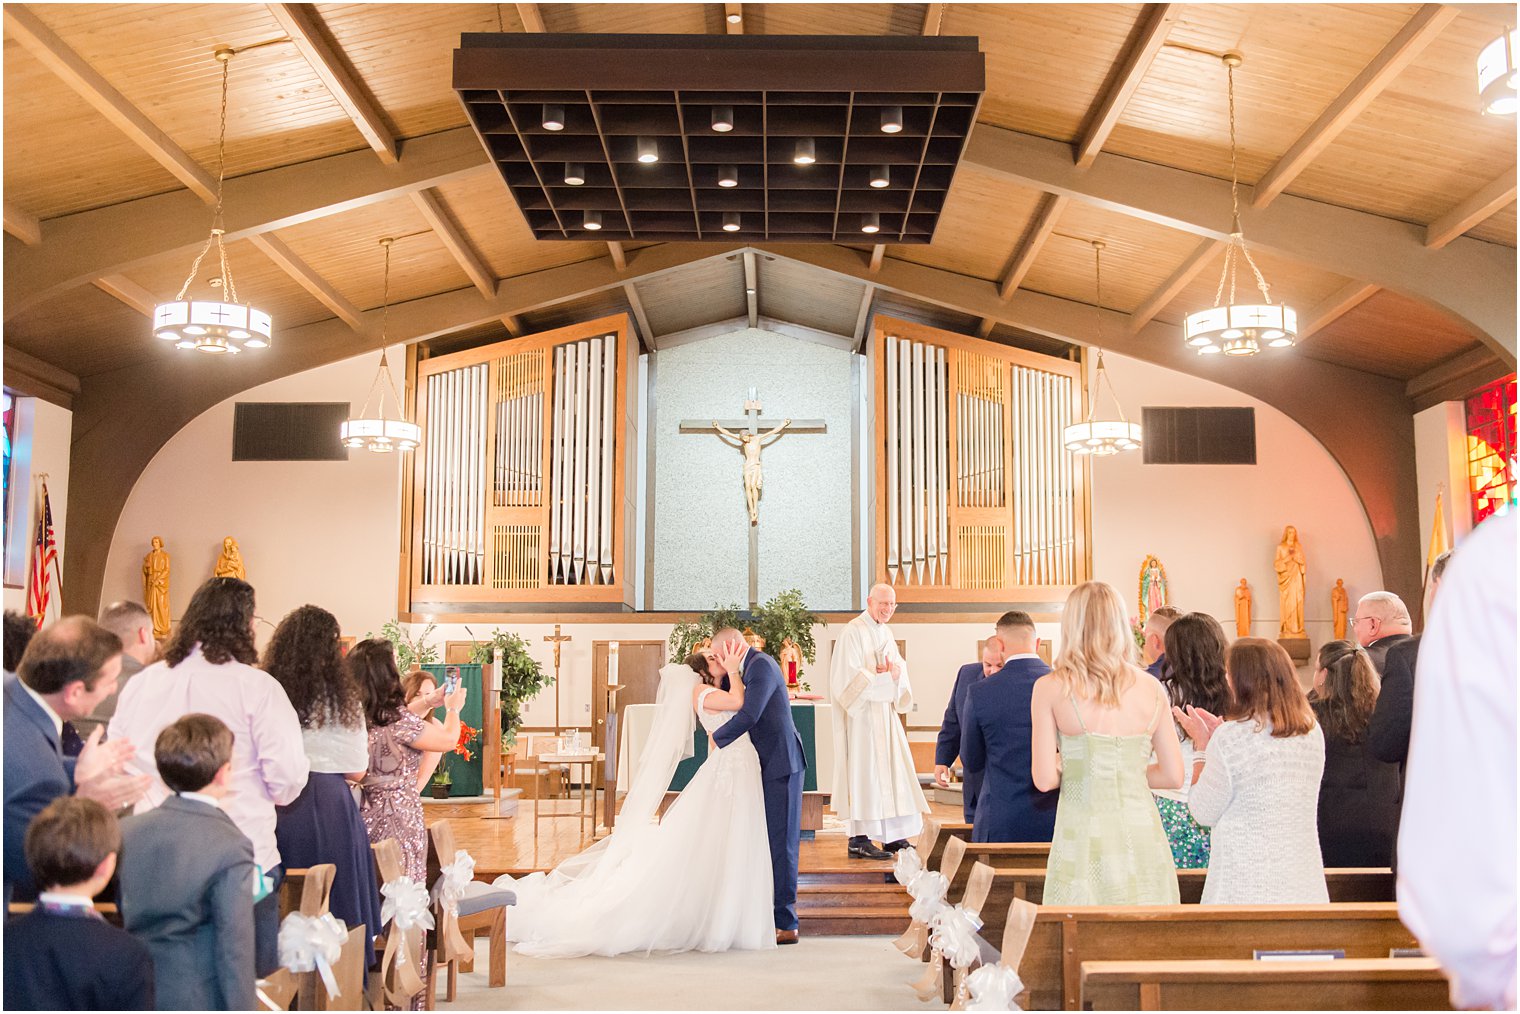 guests clap for bride and groom's first kiss during traditional wedding ceremony at Saint Matthew the Apostle church